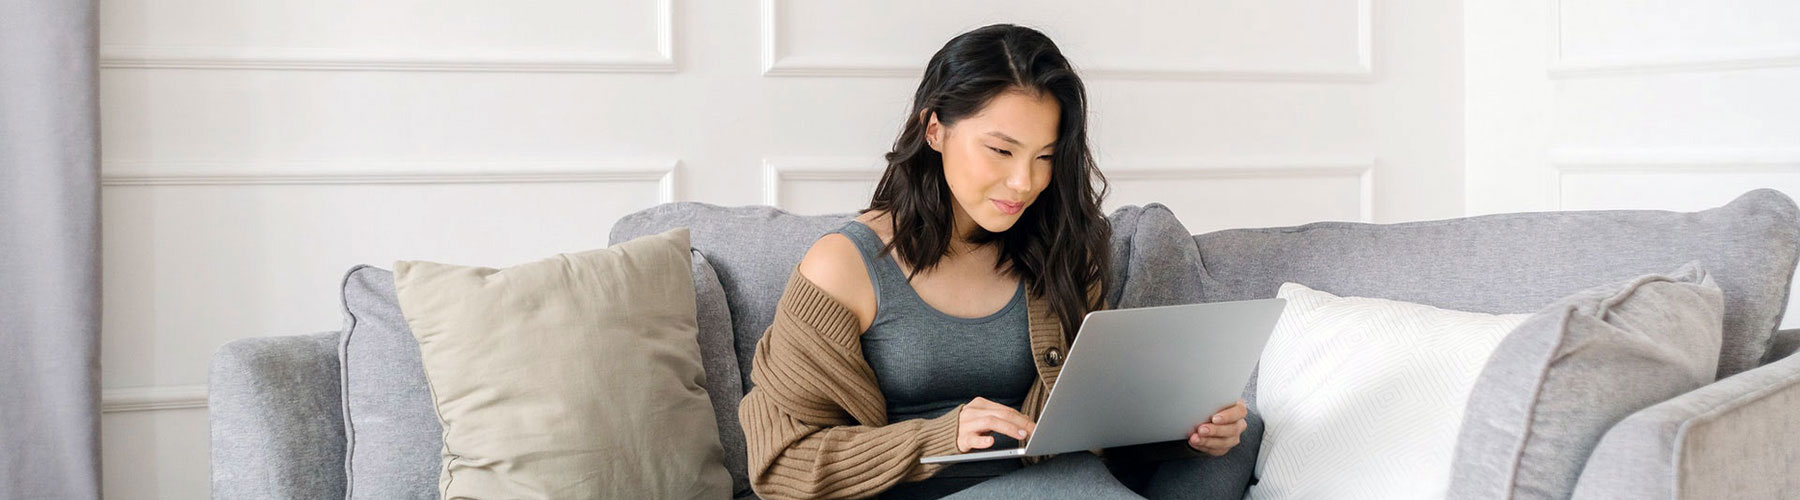 Female sitting on couch in living room using laptop